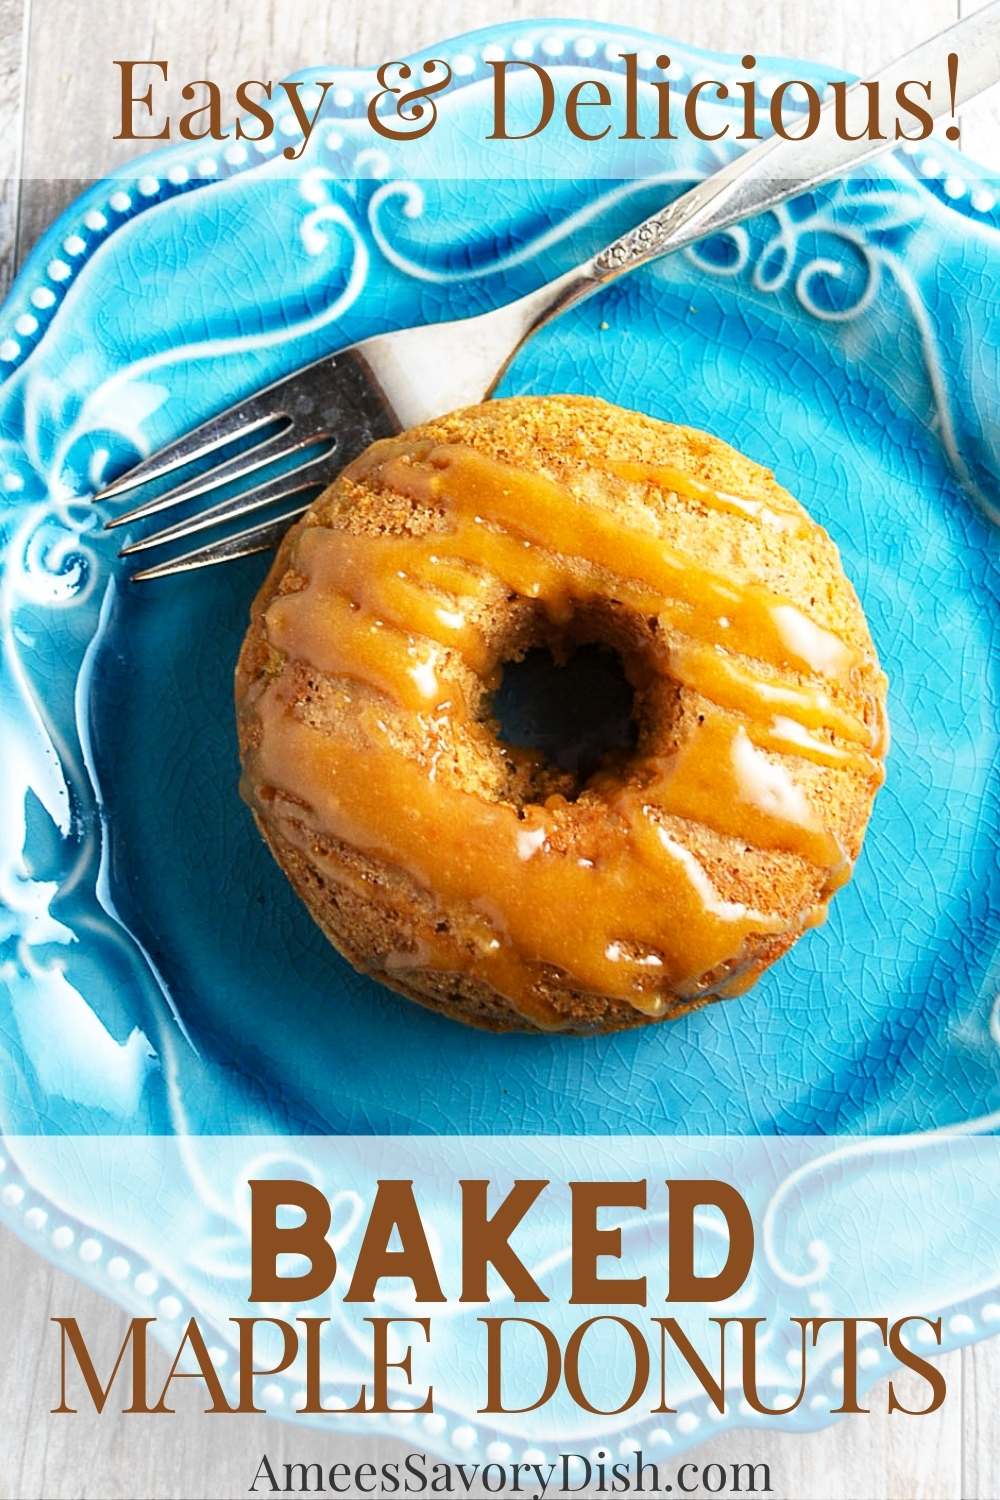 Learn how to make homemade Baked Maple Donuts with these easy-to-follow instructions! These soft and cakey donuts are sweetened with maple sugar and finished with a silky maple glaze. via @Ameessavorydish